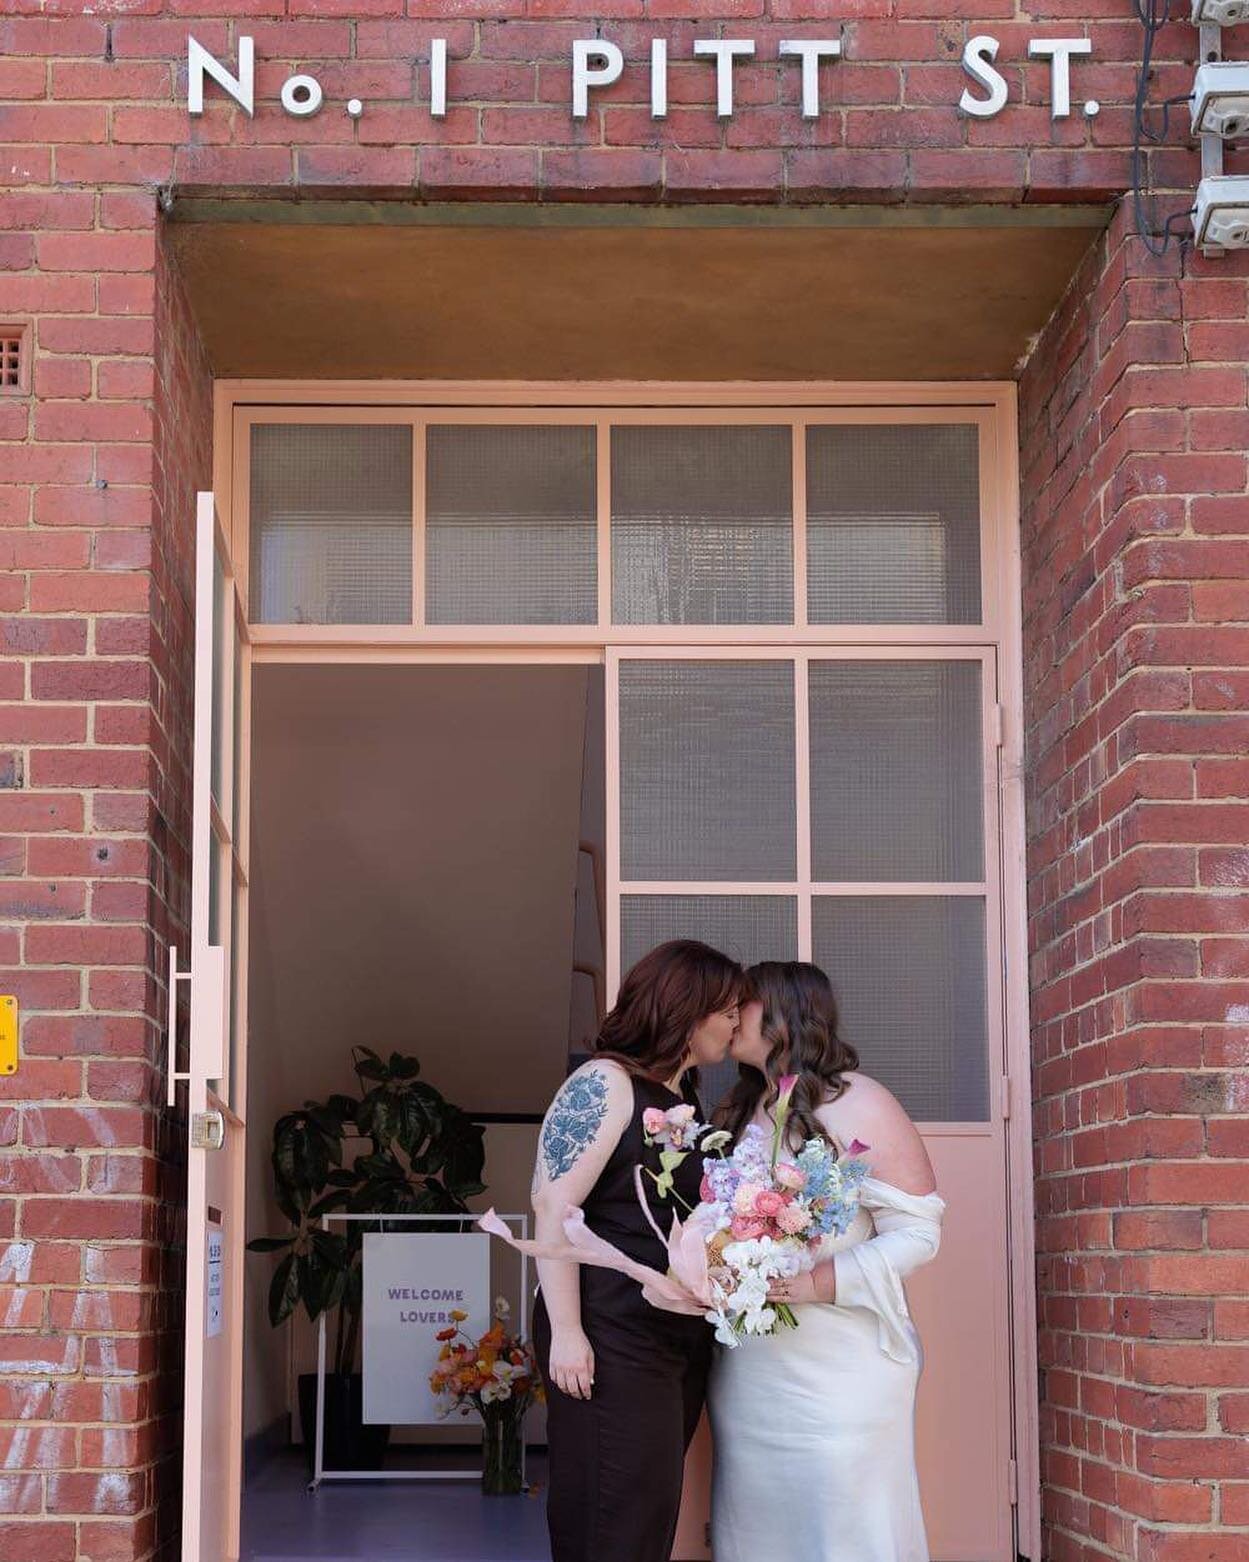 Tahlia &amp; Taryn 💘💘💘

Did you know we cover elopements? 
Not everyones dream wedding is a big to do and we totally get that. 
Talk to us about organizing a small scale wedding&hellip;

Info.petalsociety@gmail.com
https://www.petalsociety.com.au/